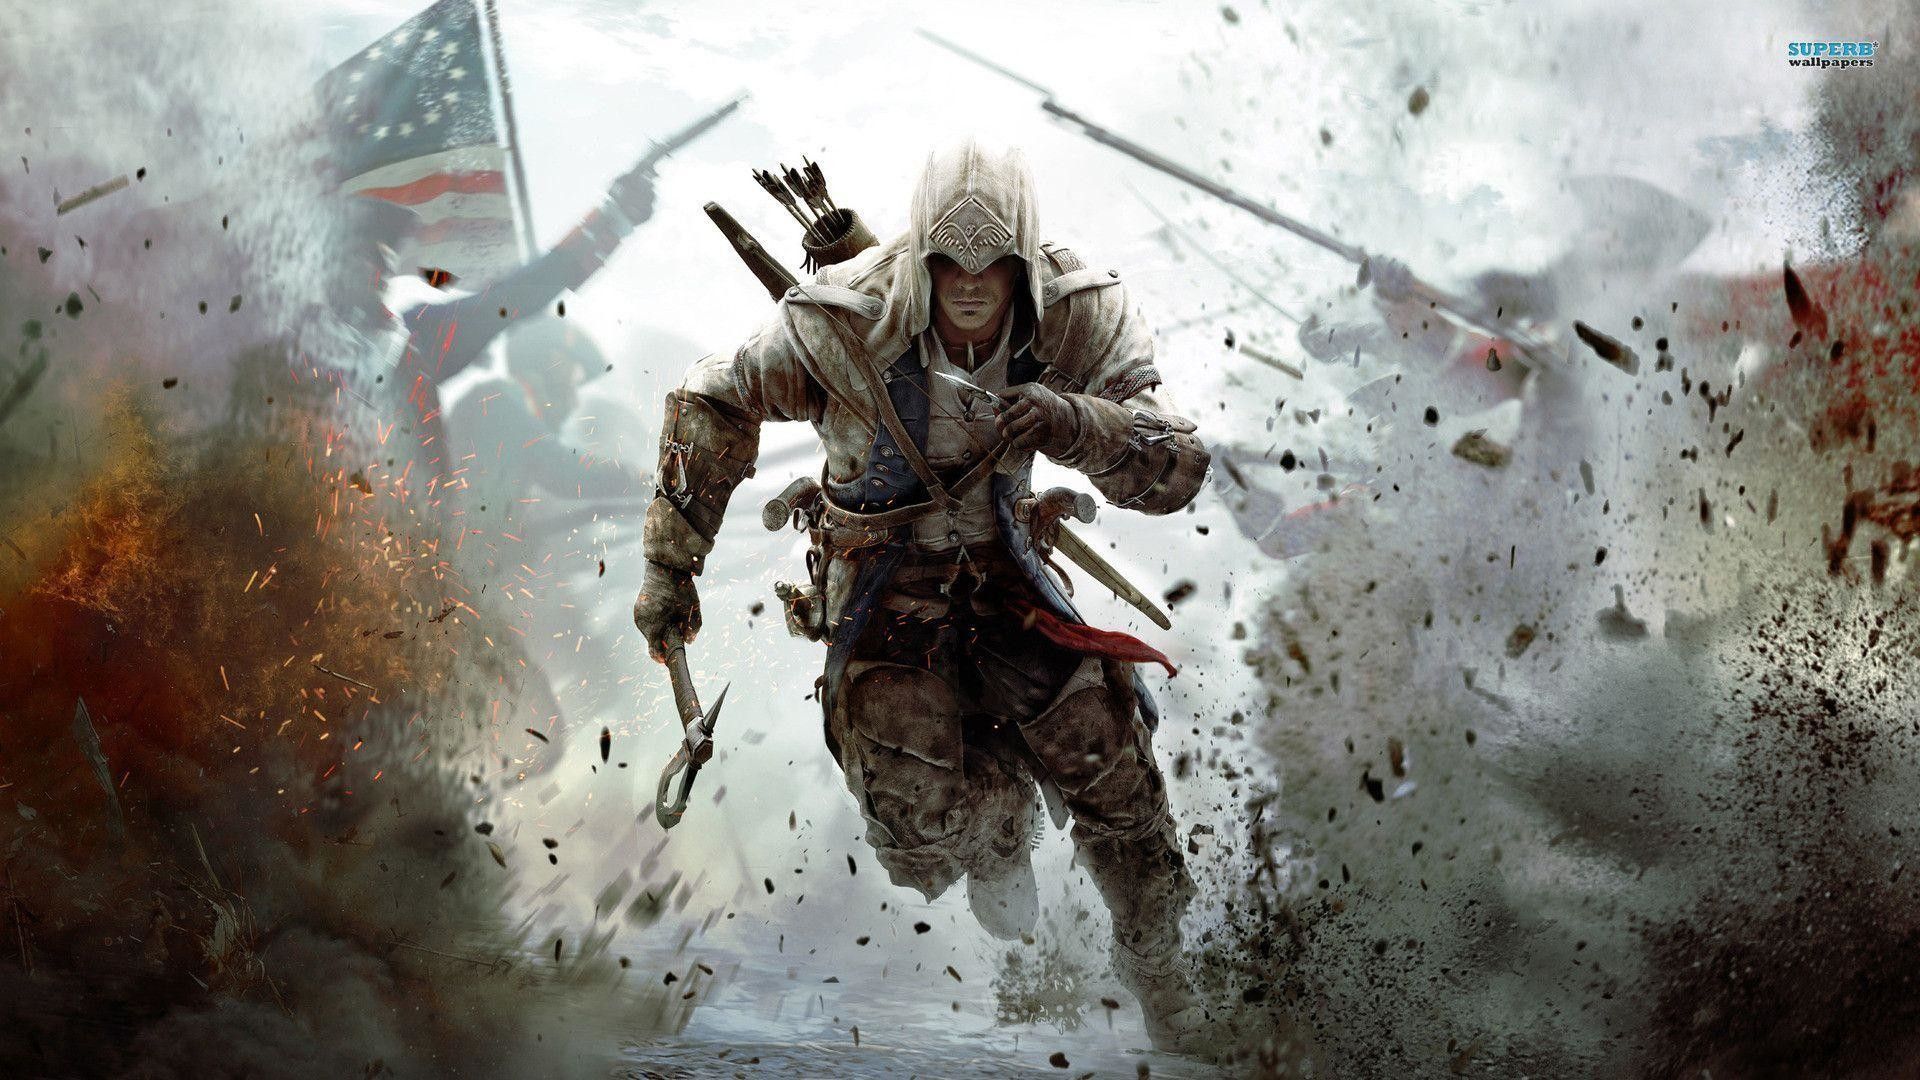 Assassin's Creed III Wallpaper Free Assassin's Creed III Background